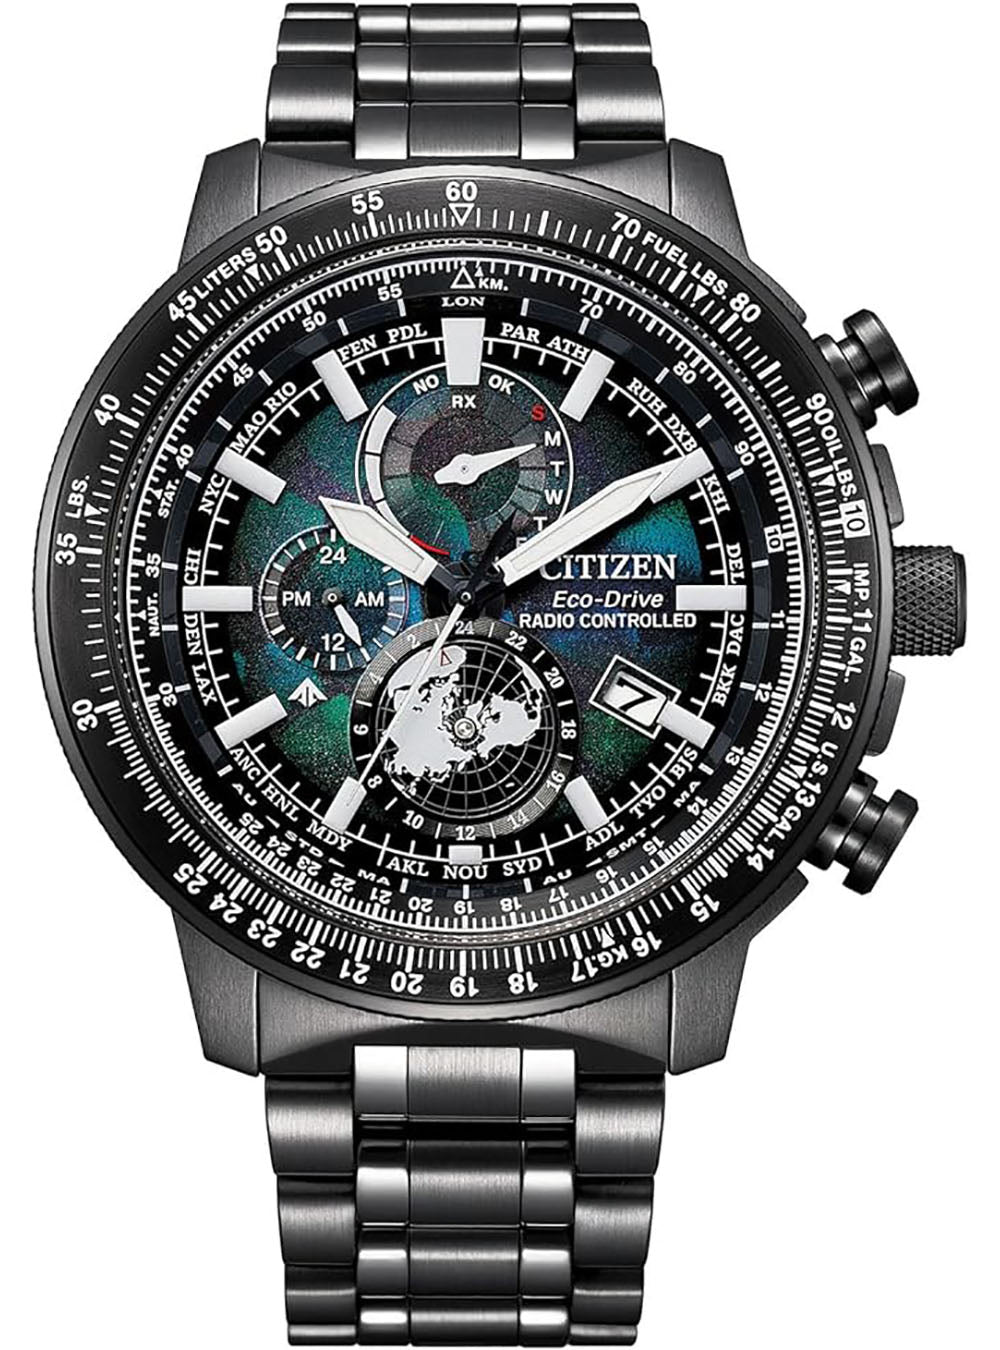 CITIZEN PROMASTER SKY LAYERS OF TIME LIMITED EDITION BY3005-56E JAPAN MOV'T JDM